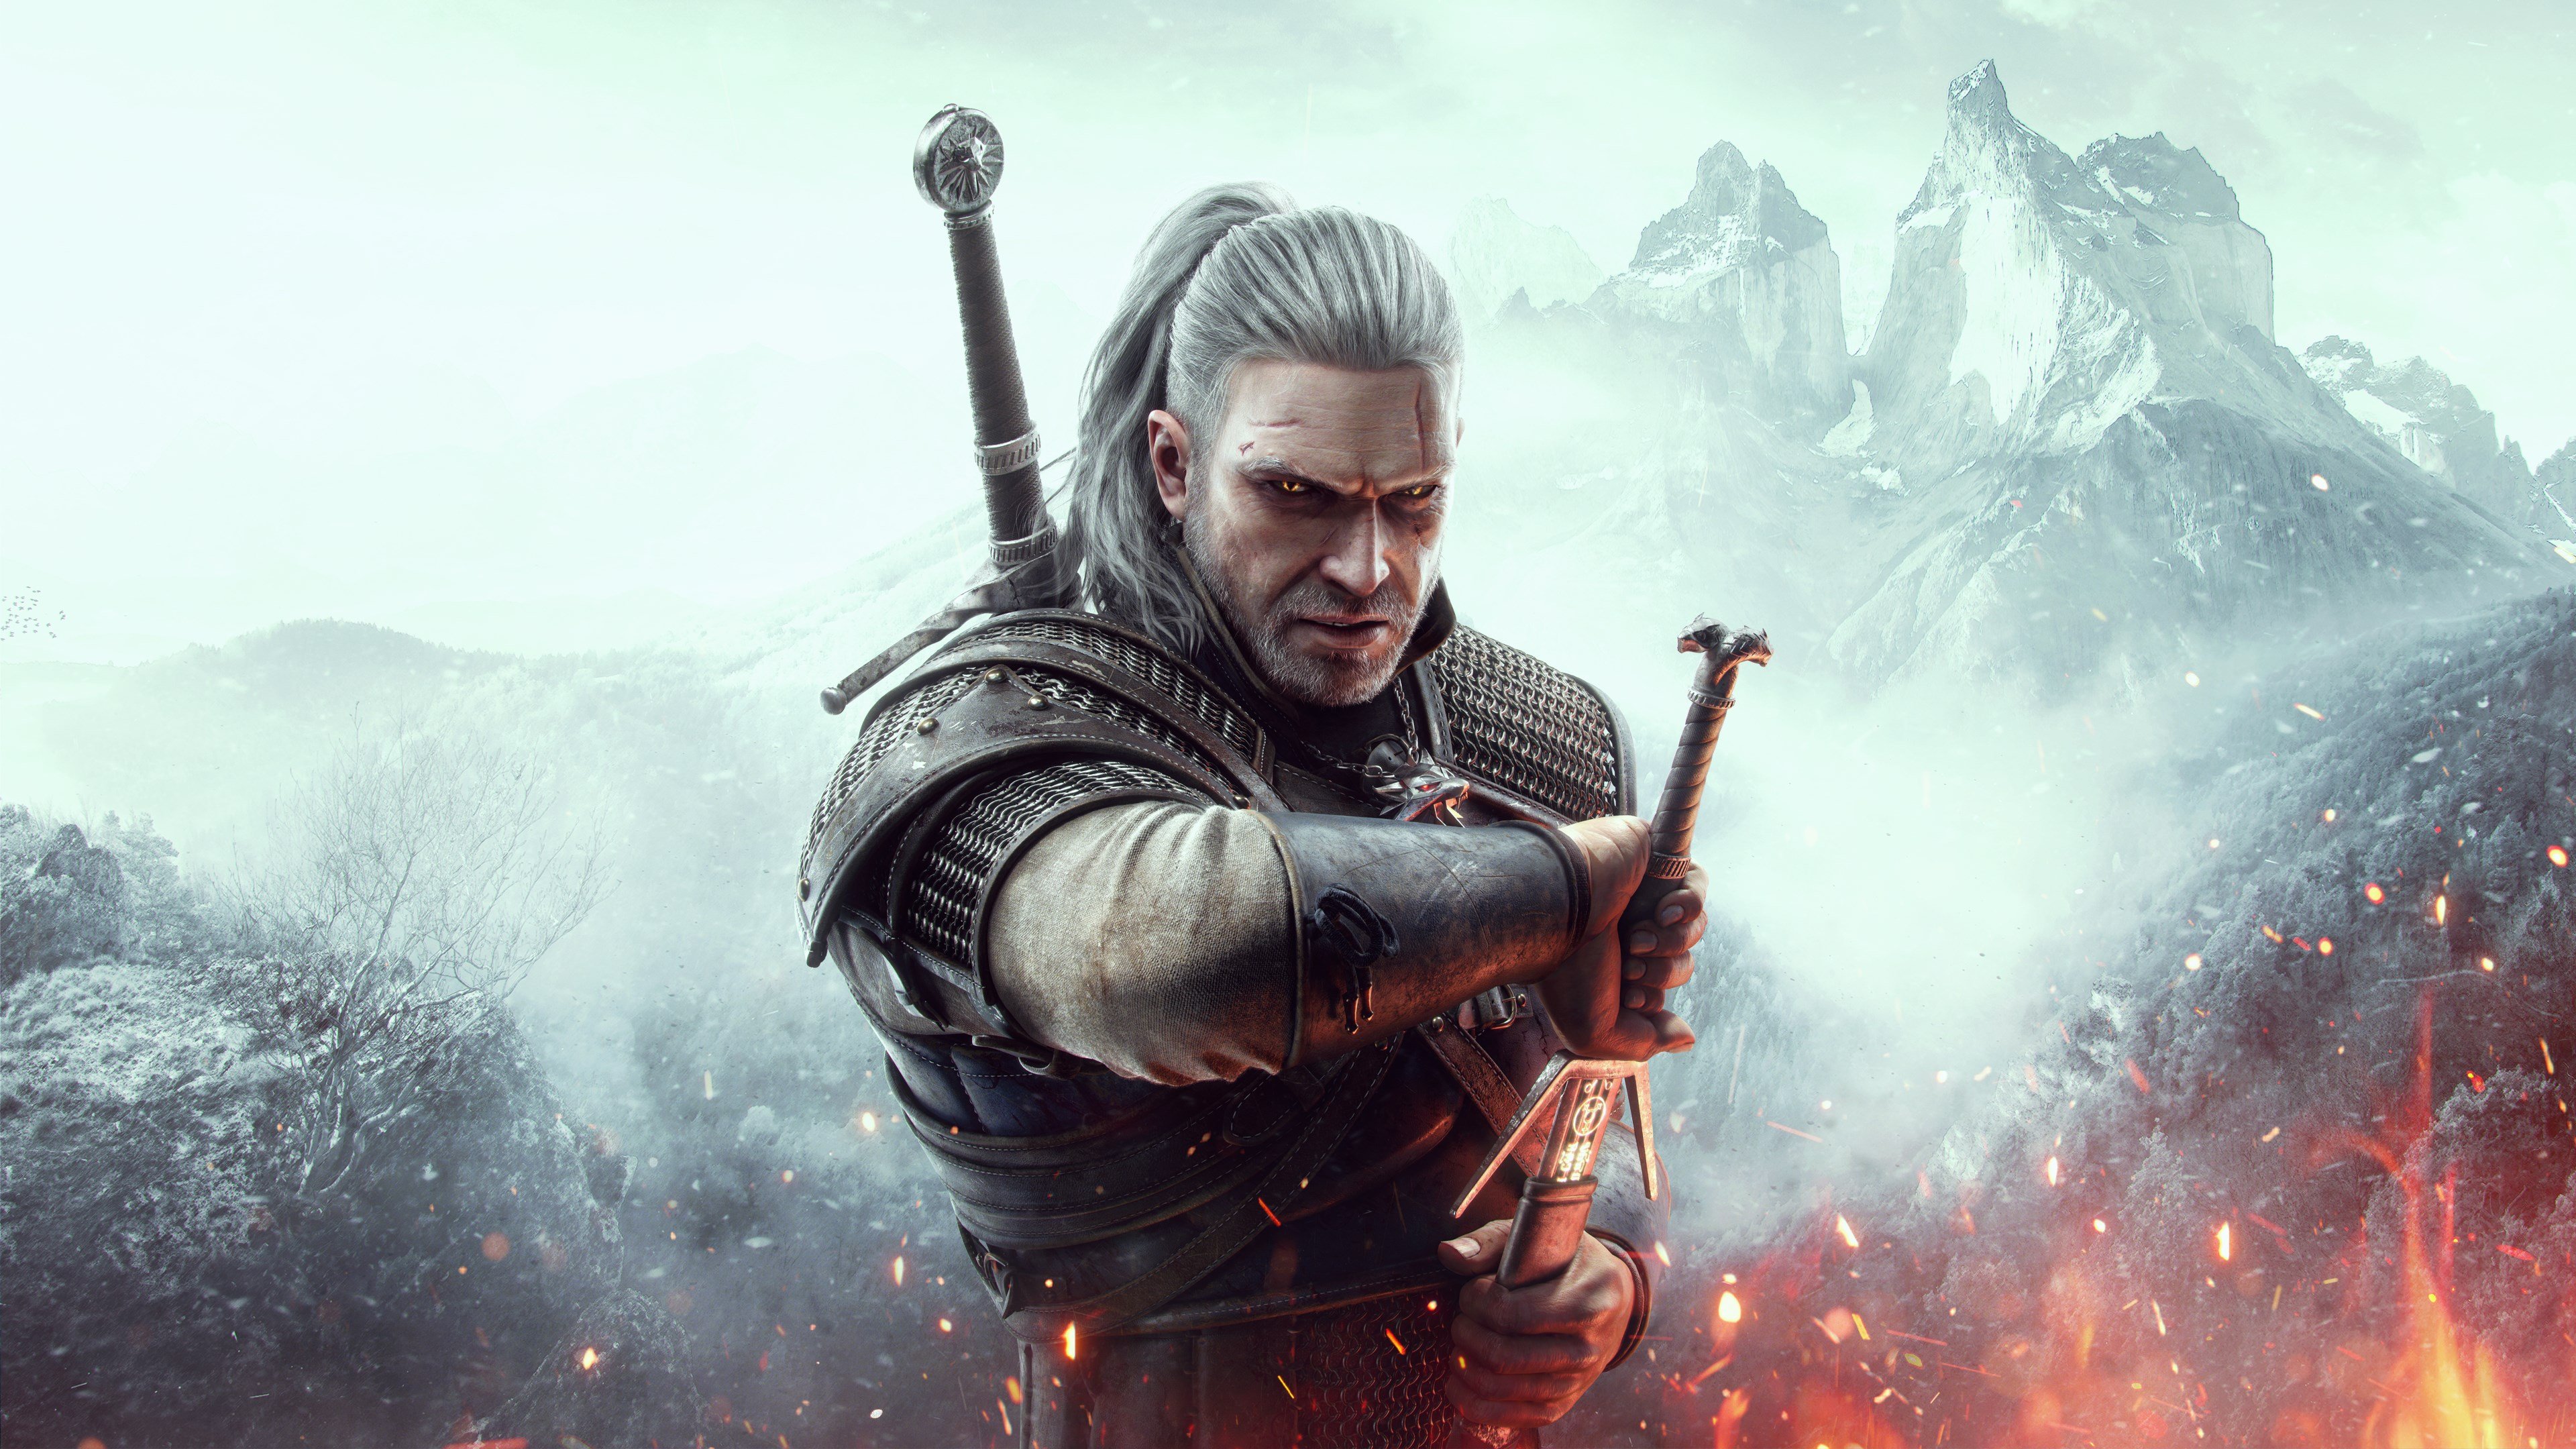 The Witcher 3: Wild Hunt – Game of the Year Edition cover image